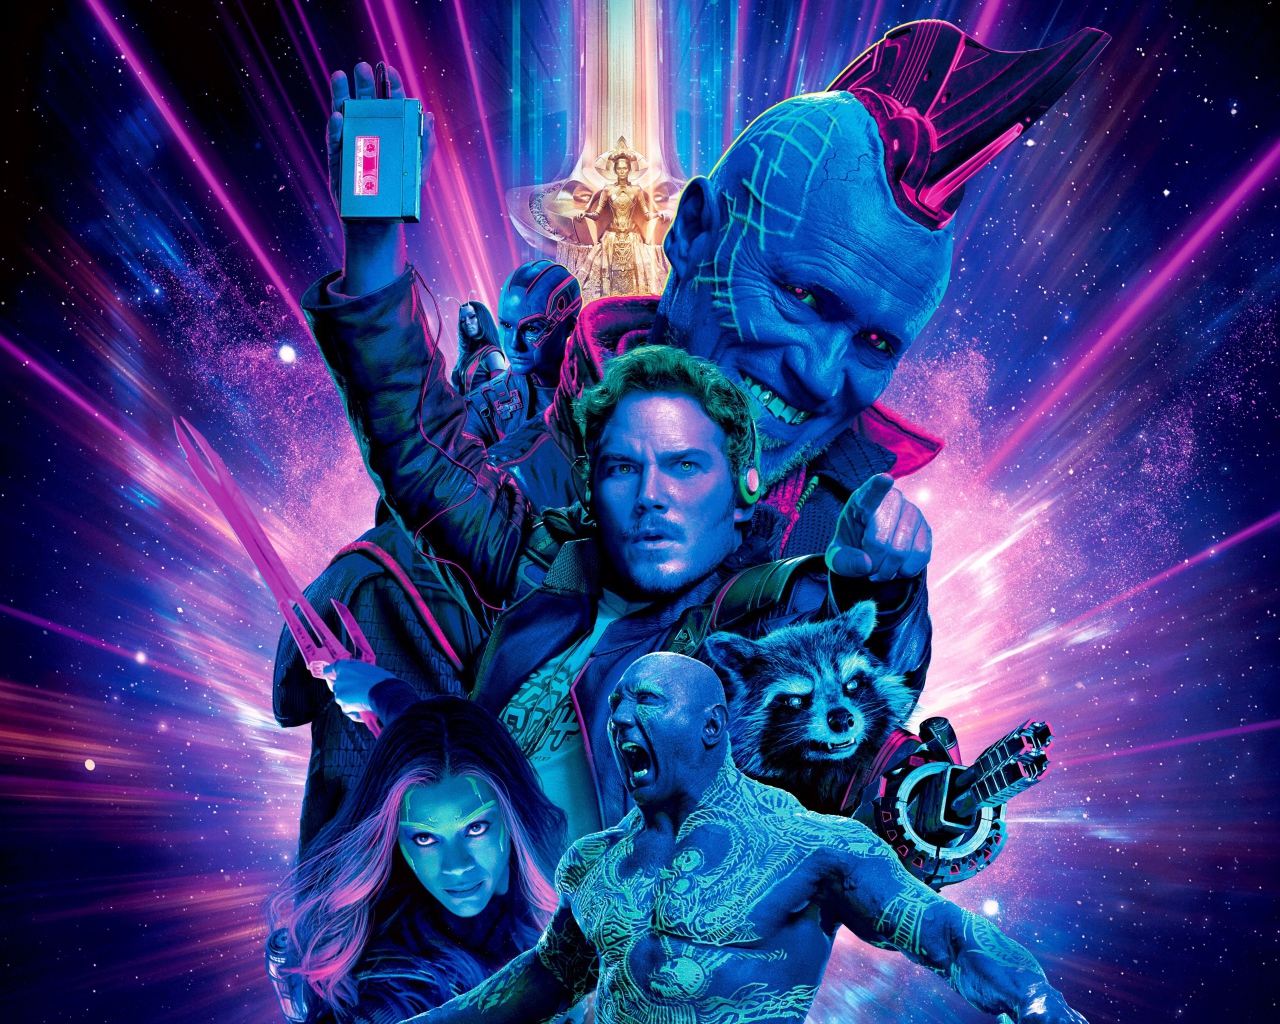 Fantastic heroes of the movie Guardians of the Galaxy 2